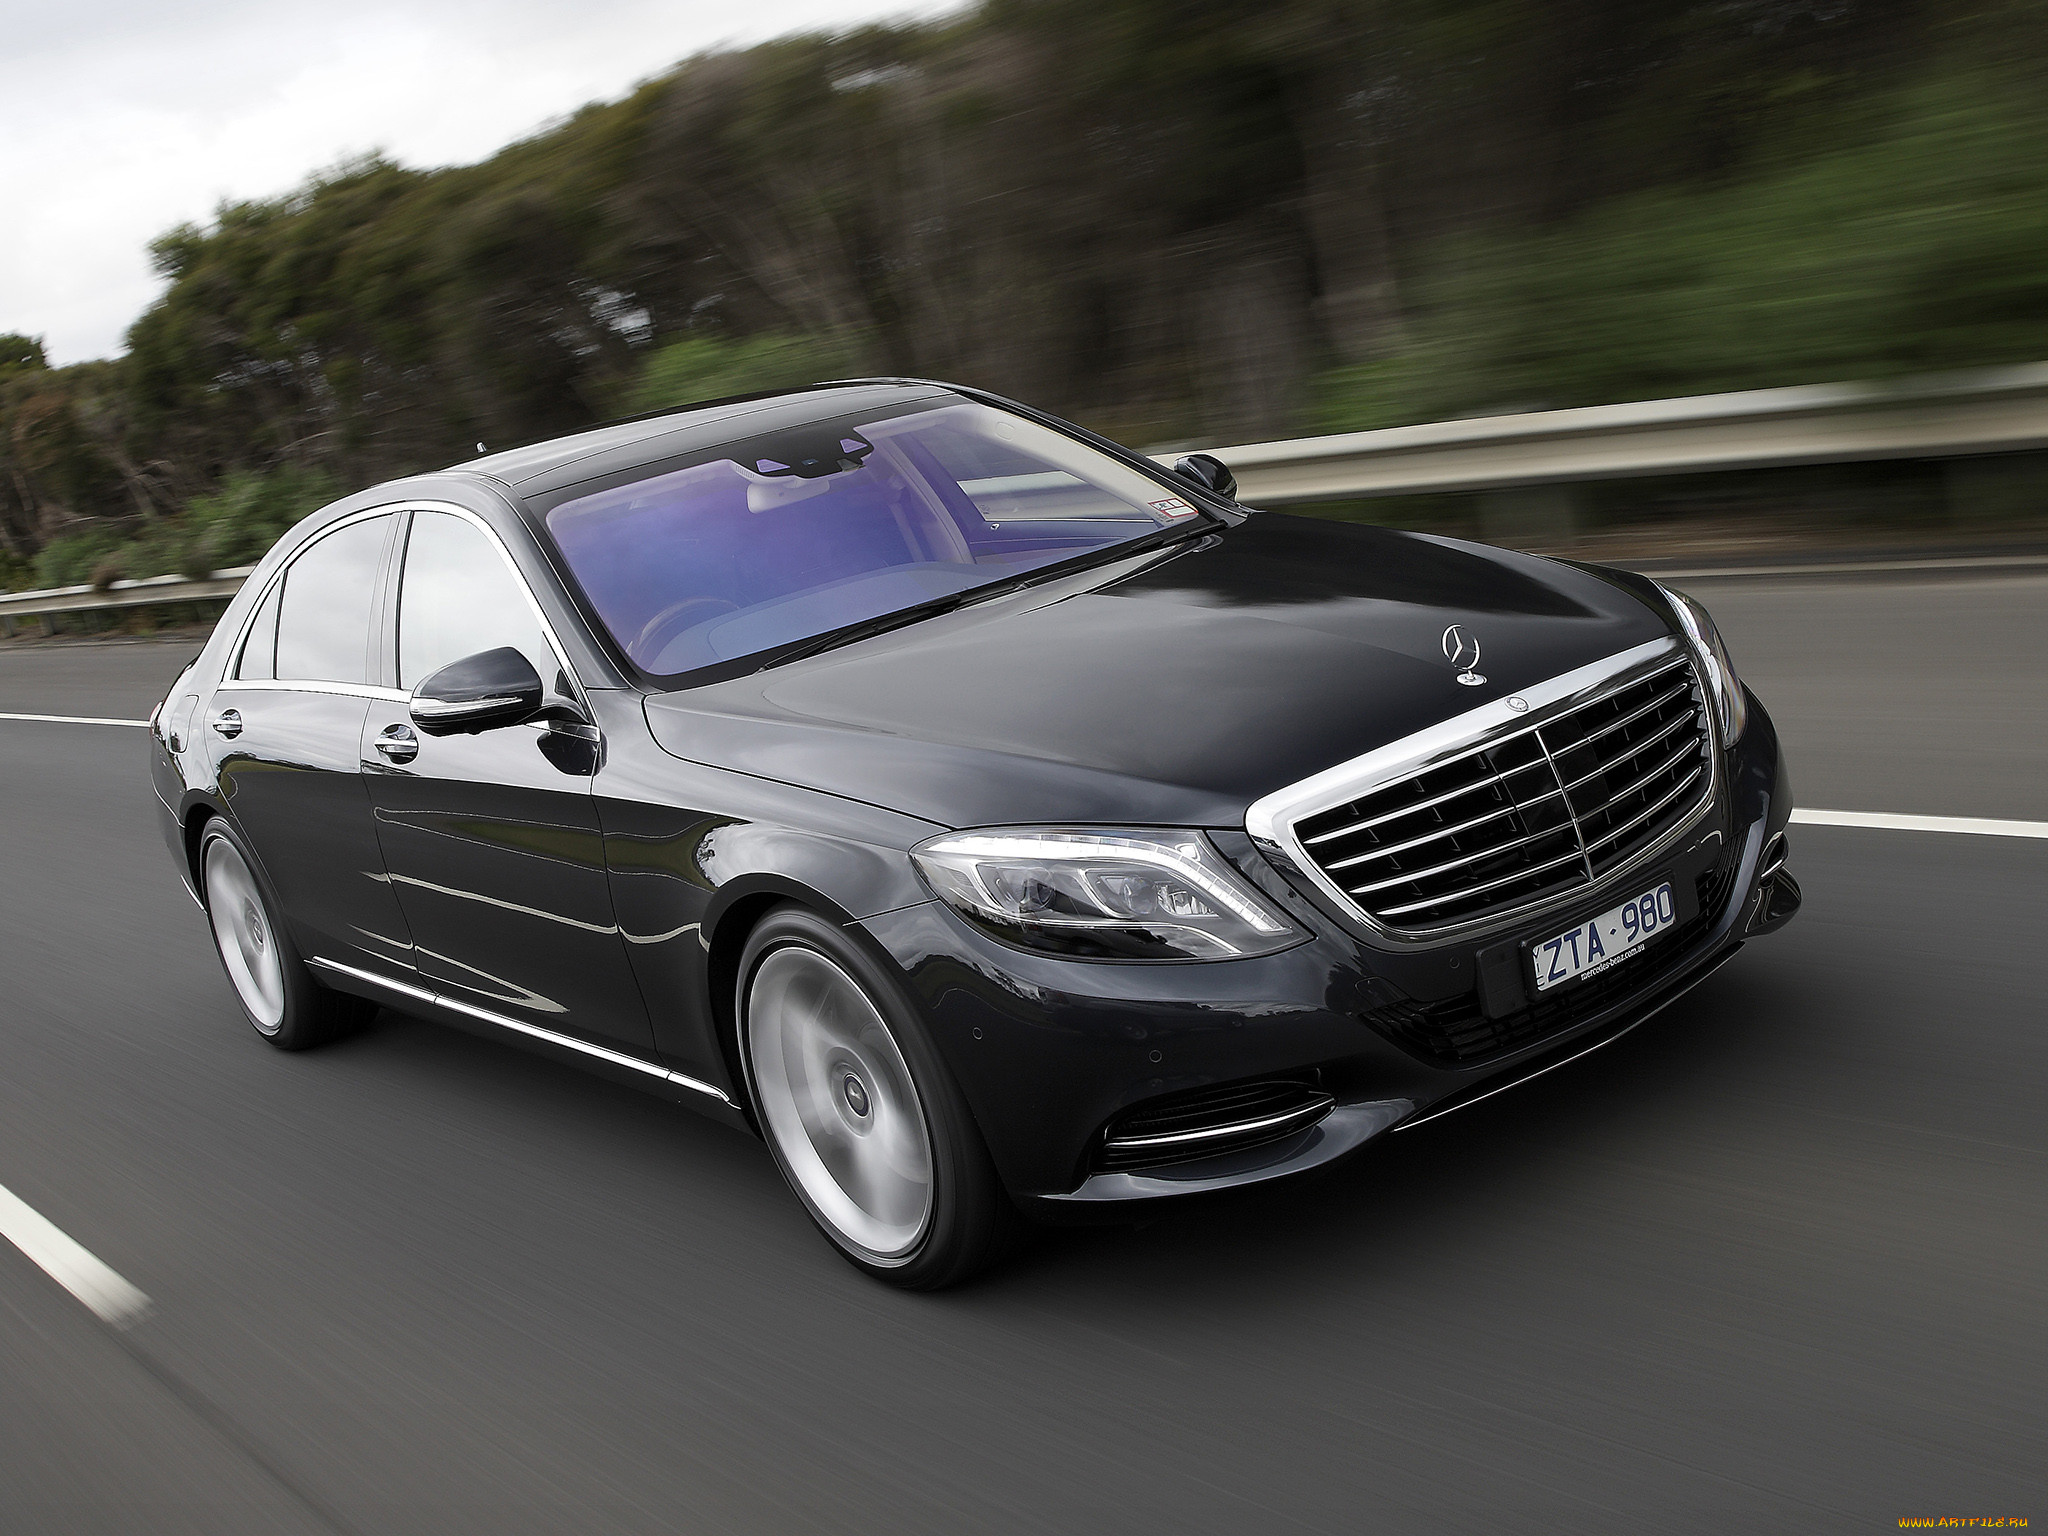 S500 w222. Mercedes-Benz s500 (222). Мерседес s500 w222. Mercedes s class s500. Мерседес s500 222.